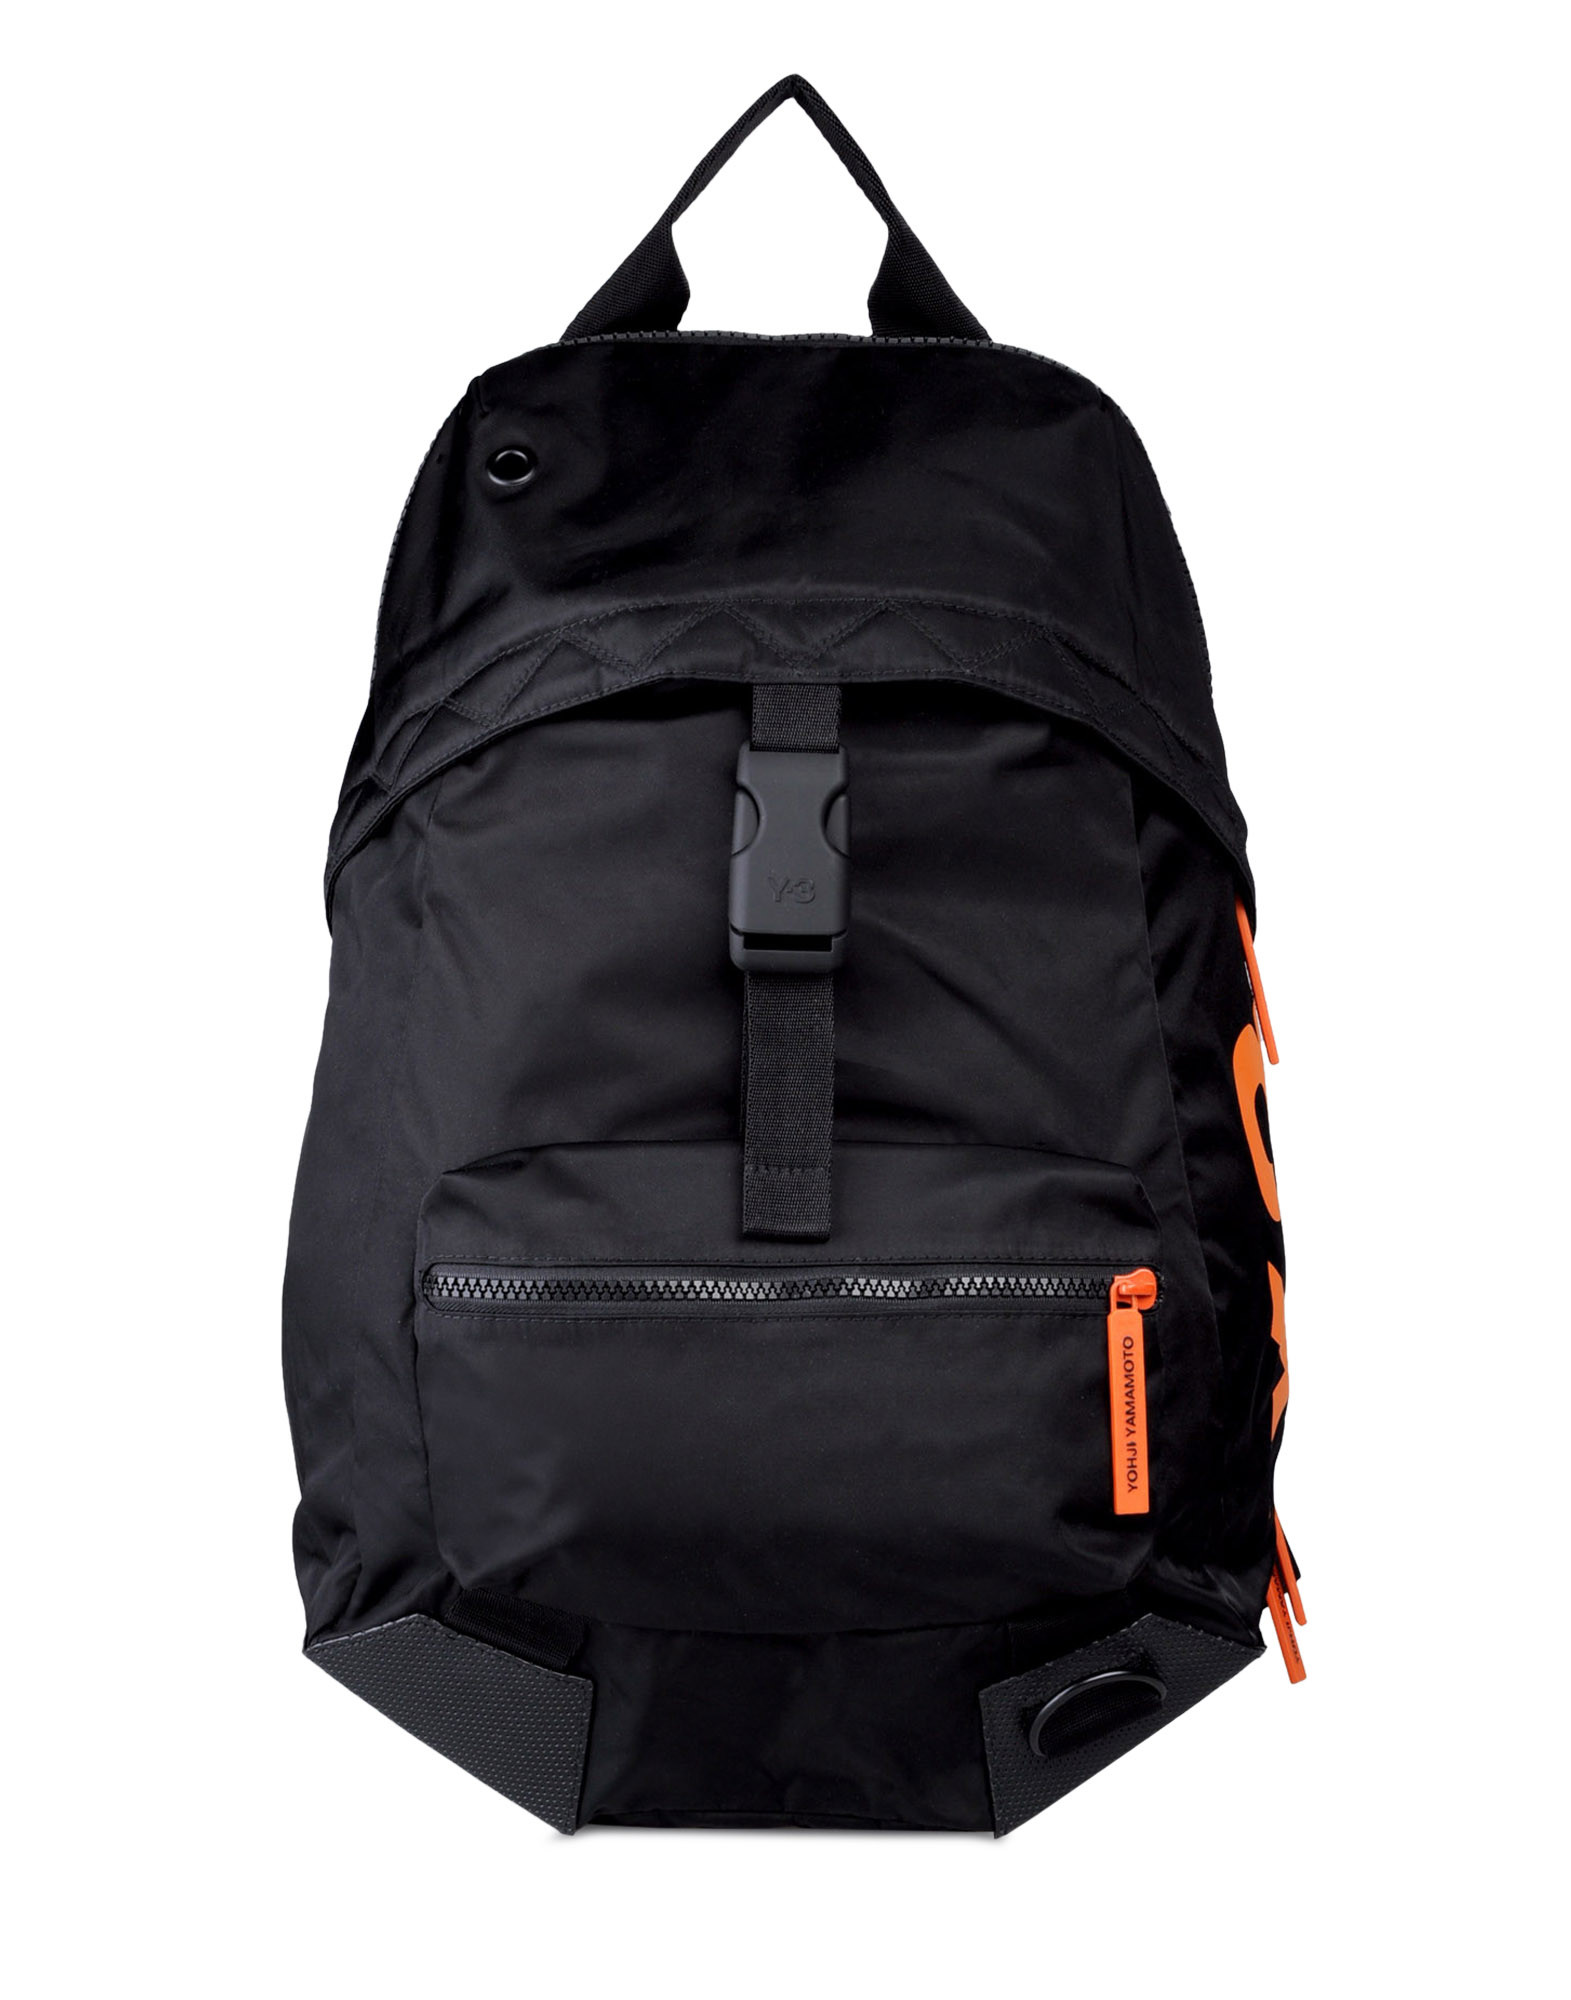 Y 3 Future Sport Backpack for Men | Adidas Y-3 Official Store